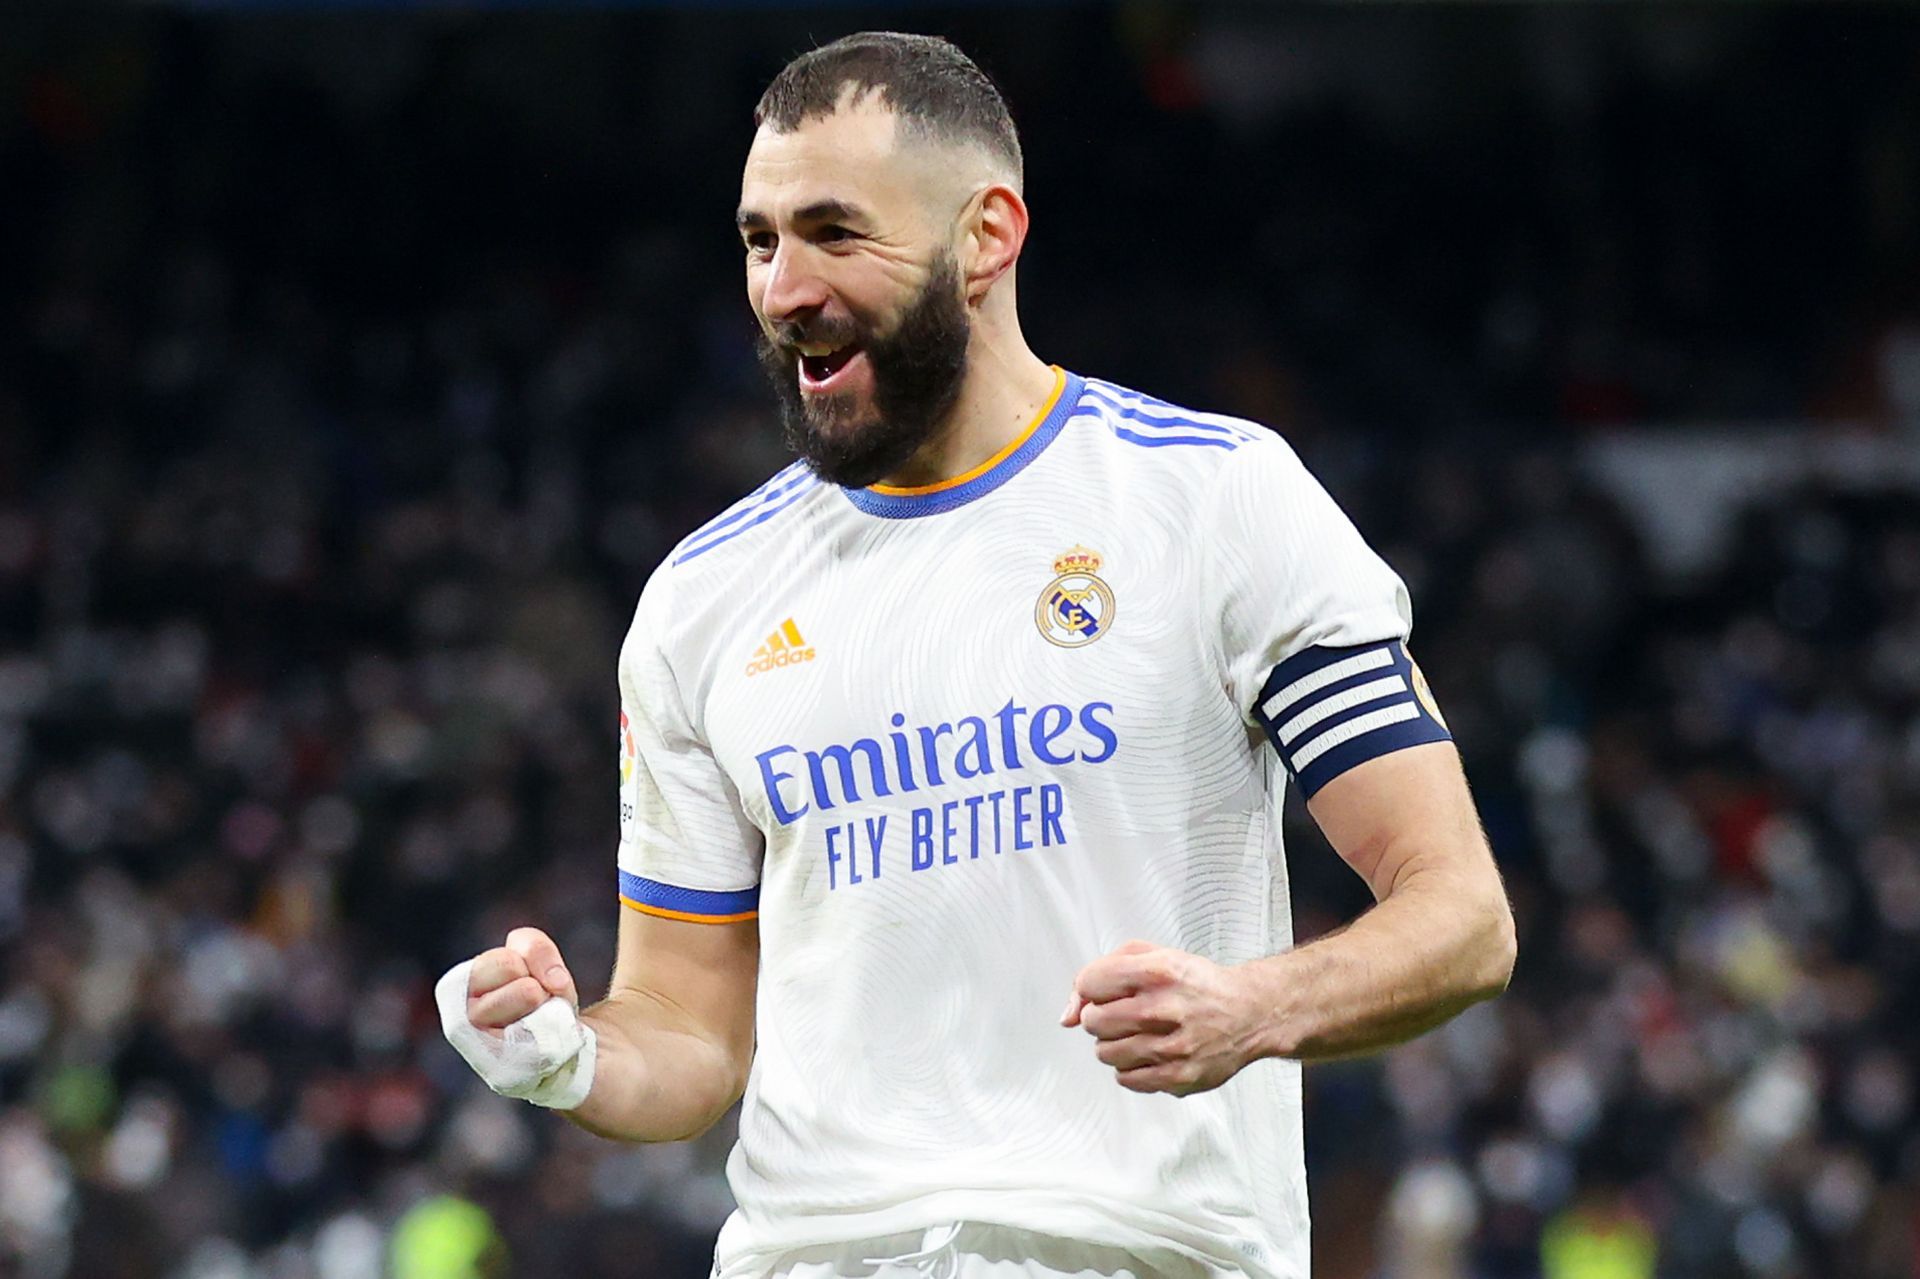 Real Madrid will once again rely on Karim Benzema in the Champions League